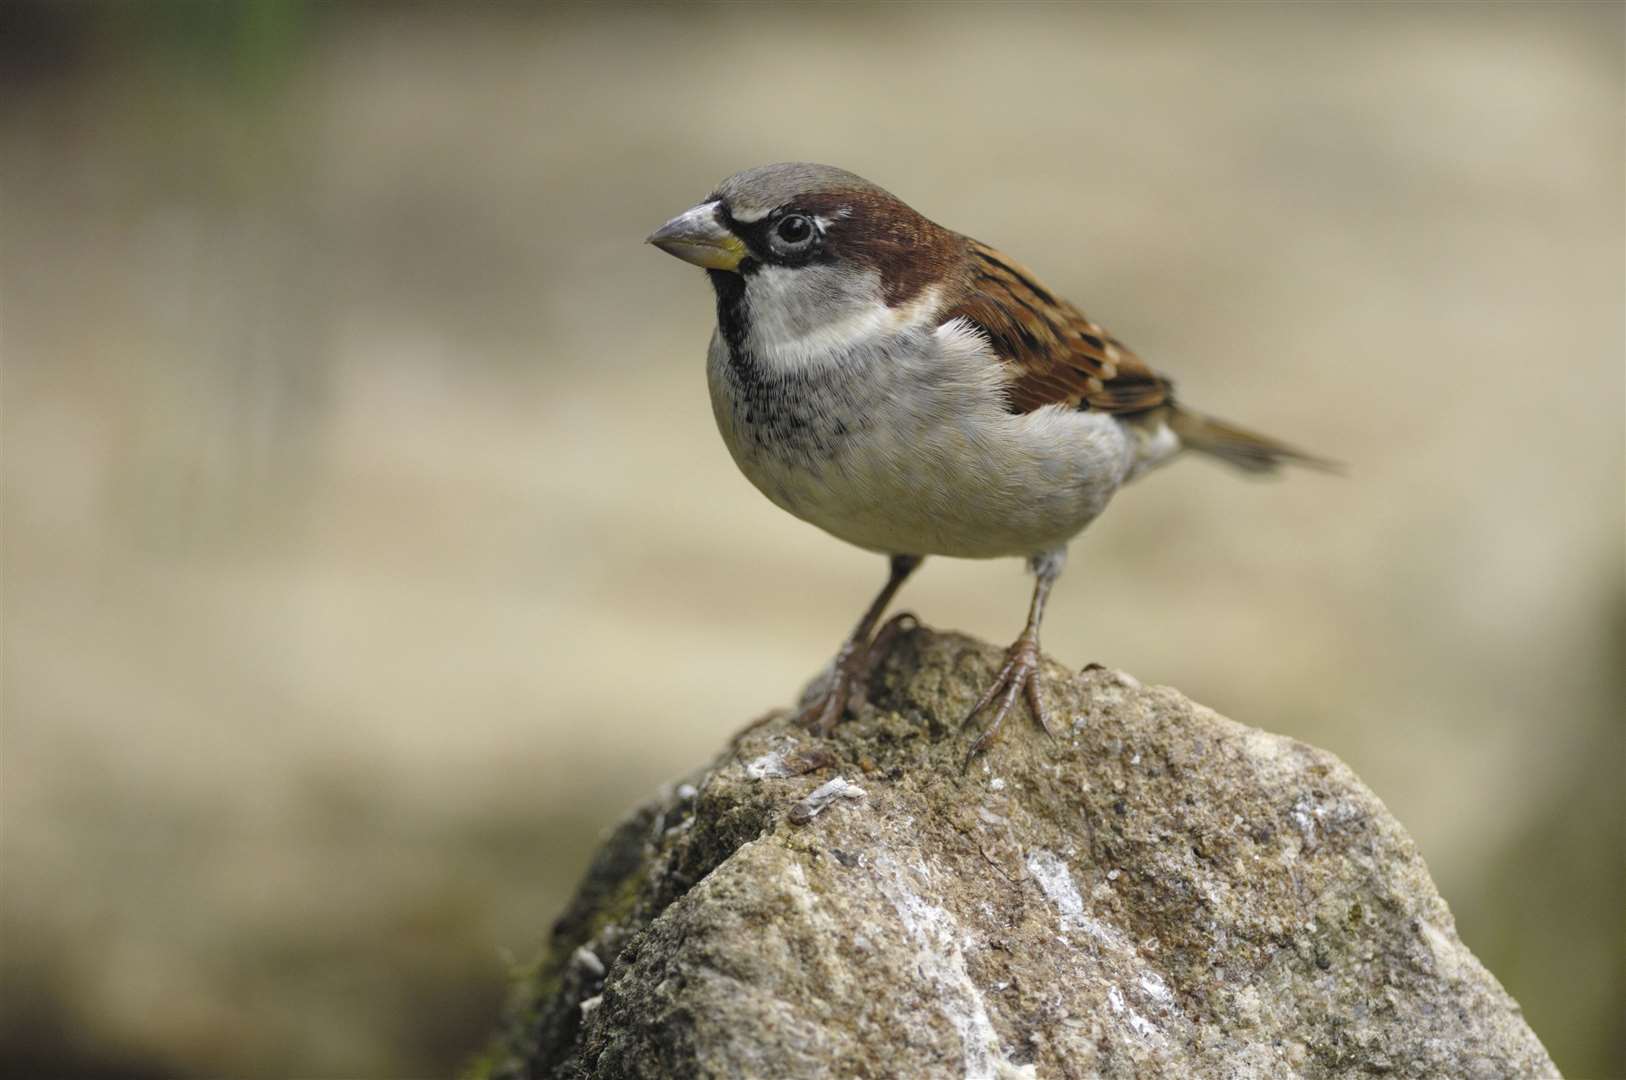 House sparrows are the most common birds in the UK but for how much longer?